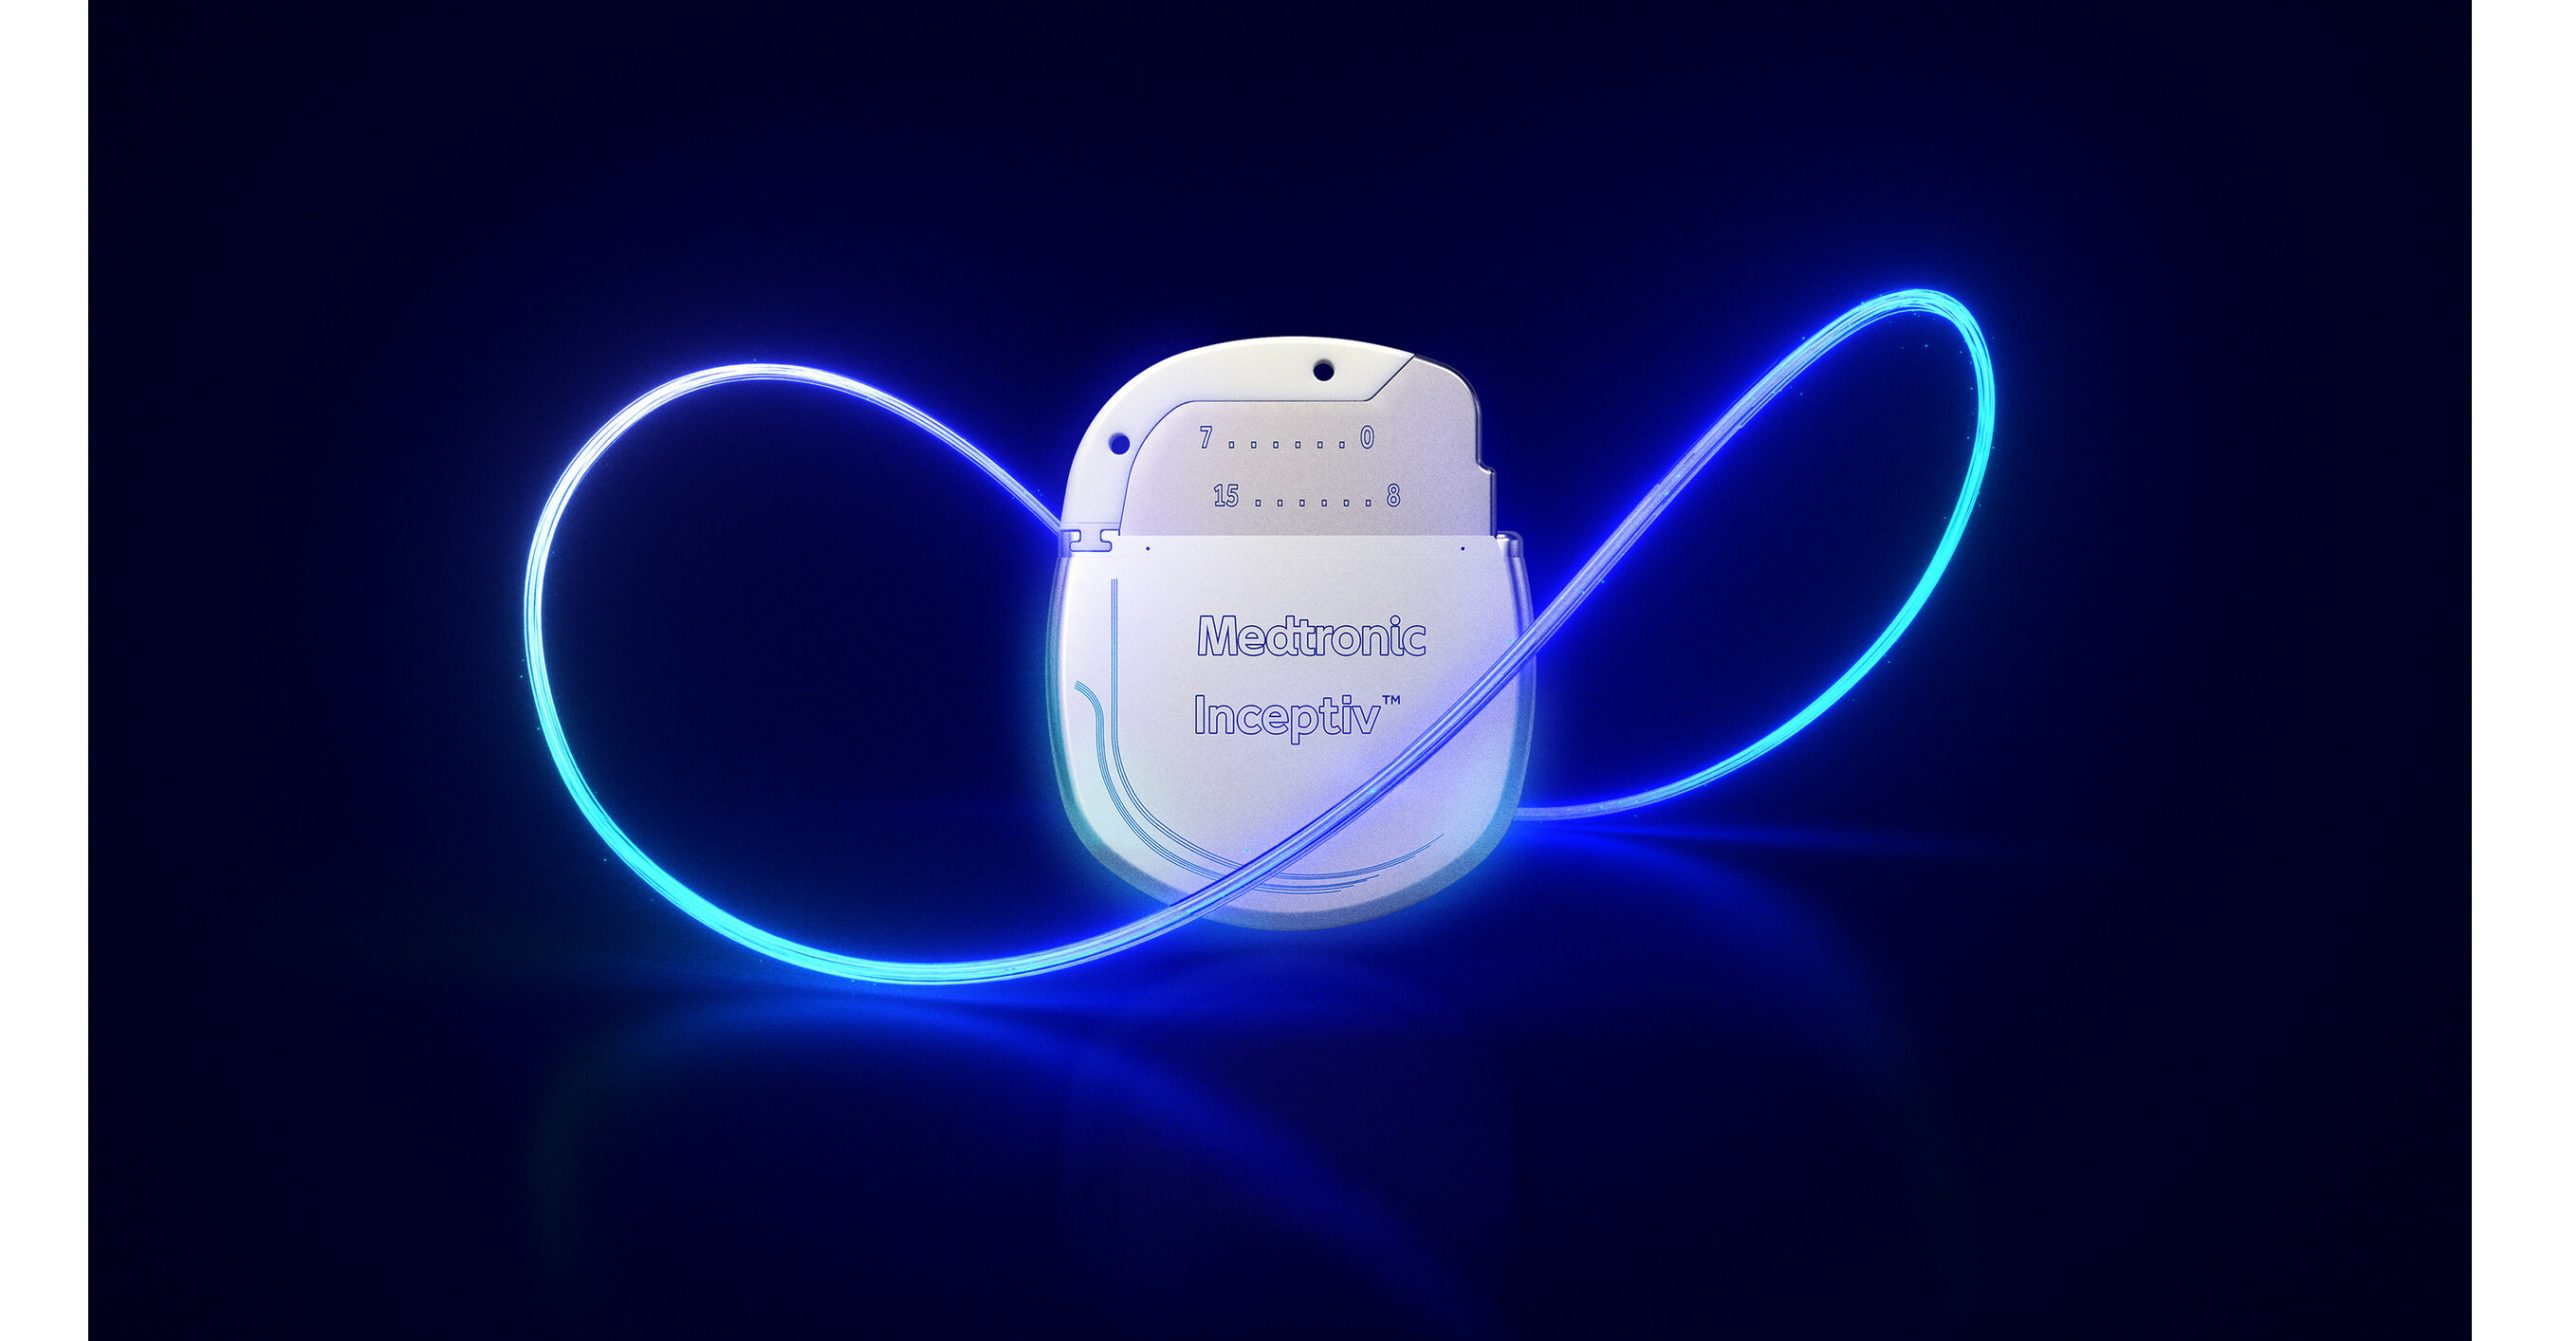 Medtronic receives FDA approval for Inceptiv closed-loop spinal cord stimulator [Video]